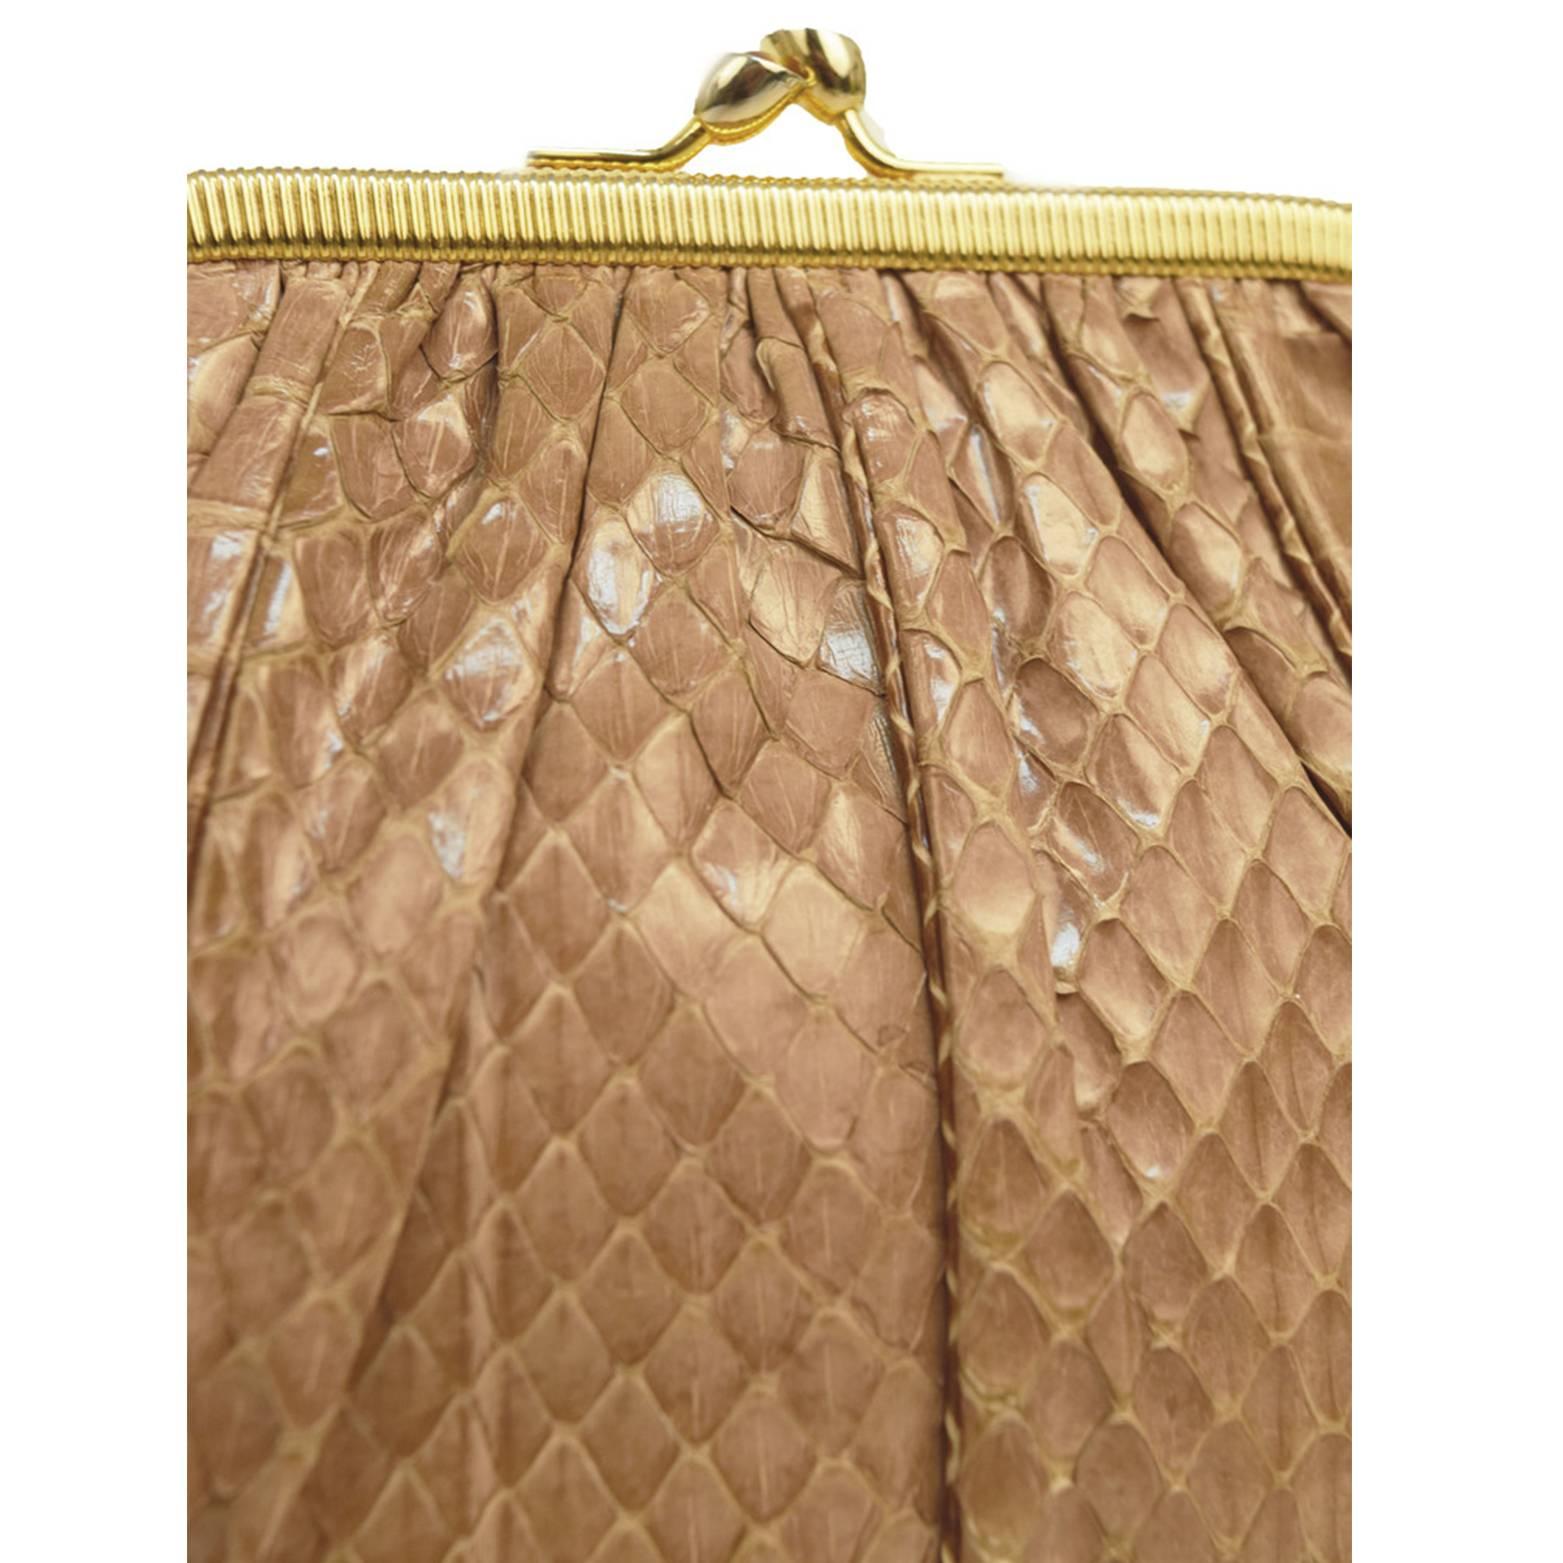 This Judith Leiber vintage convertible clutch is made from real blush snakeskin. Has gold dutch closure and tiger's eye precious gem embellishment.